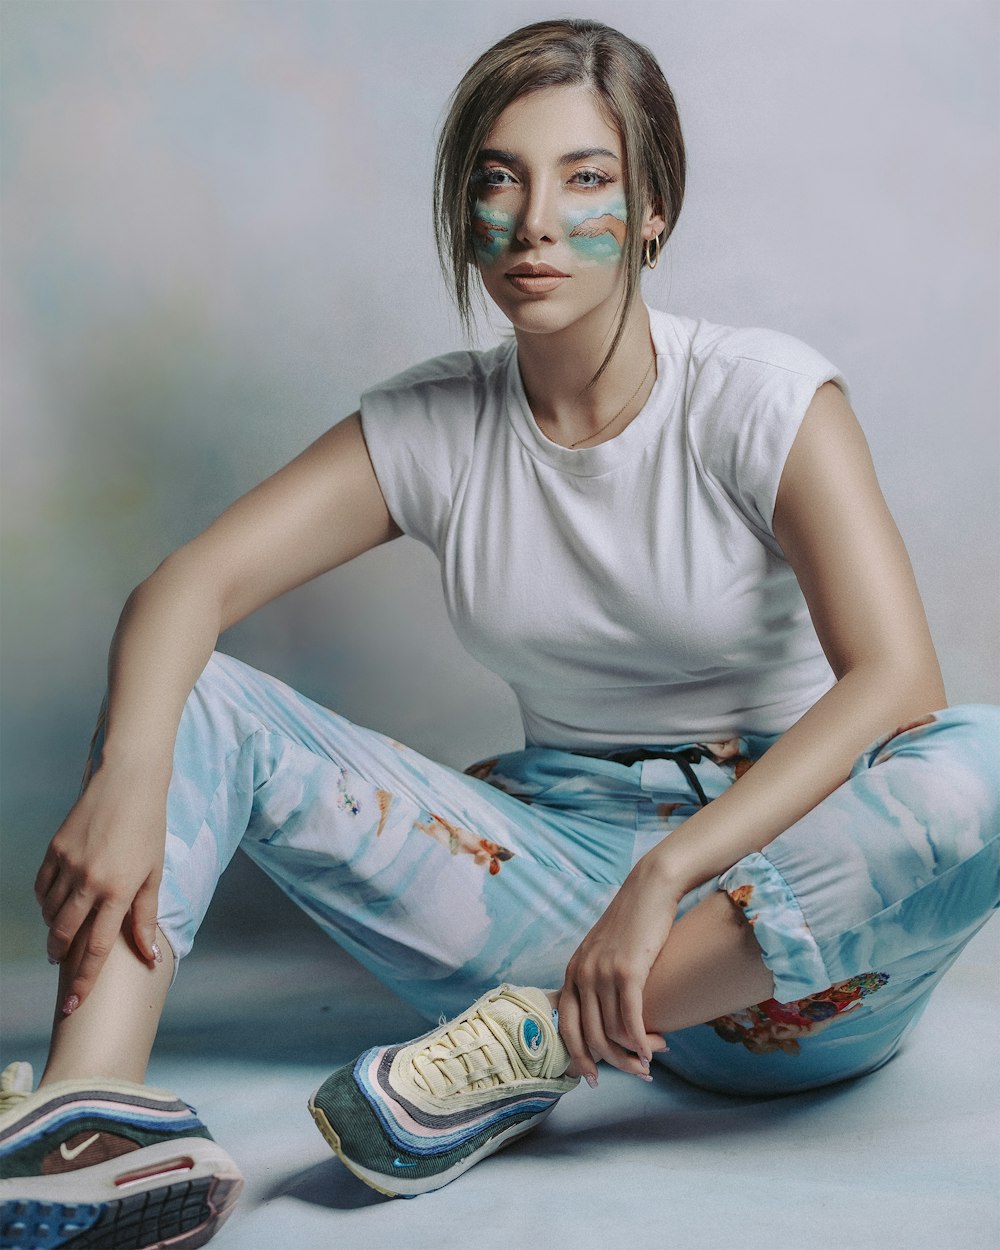 woman in white crew neck t-shirt and blue and white pants sitting on floor